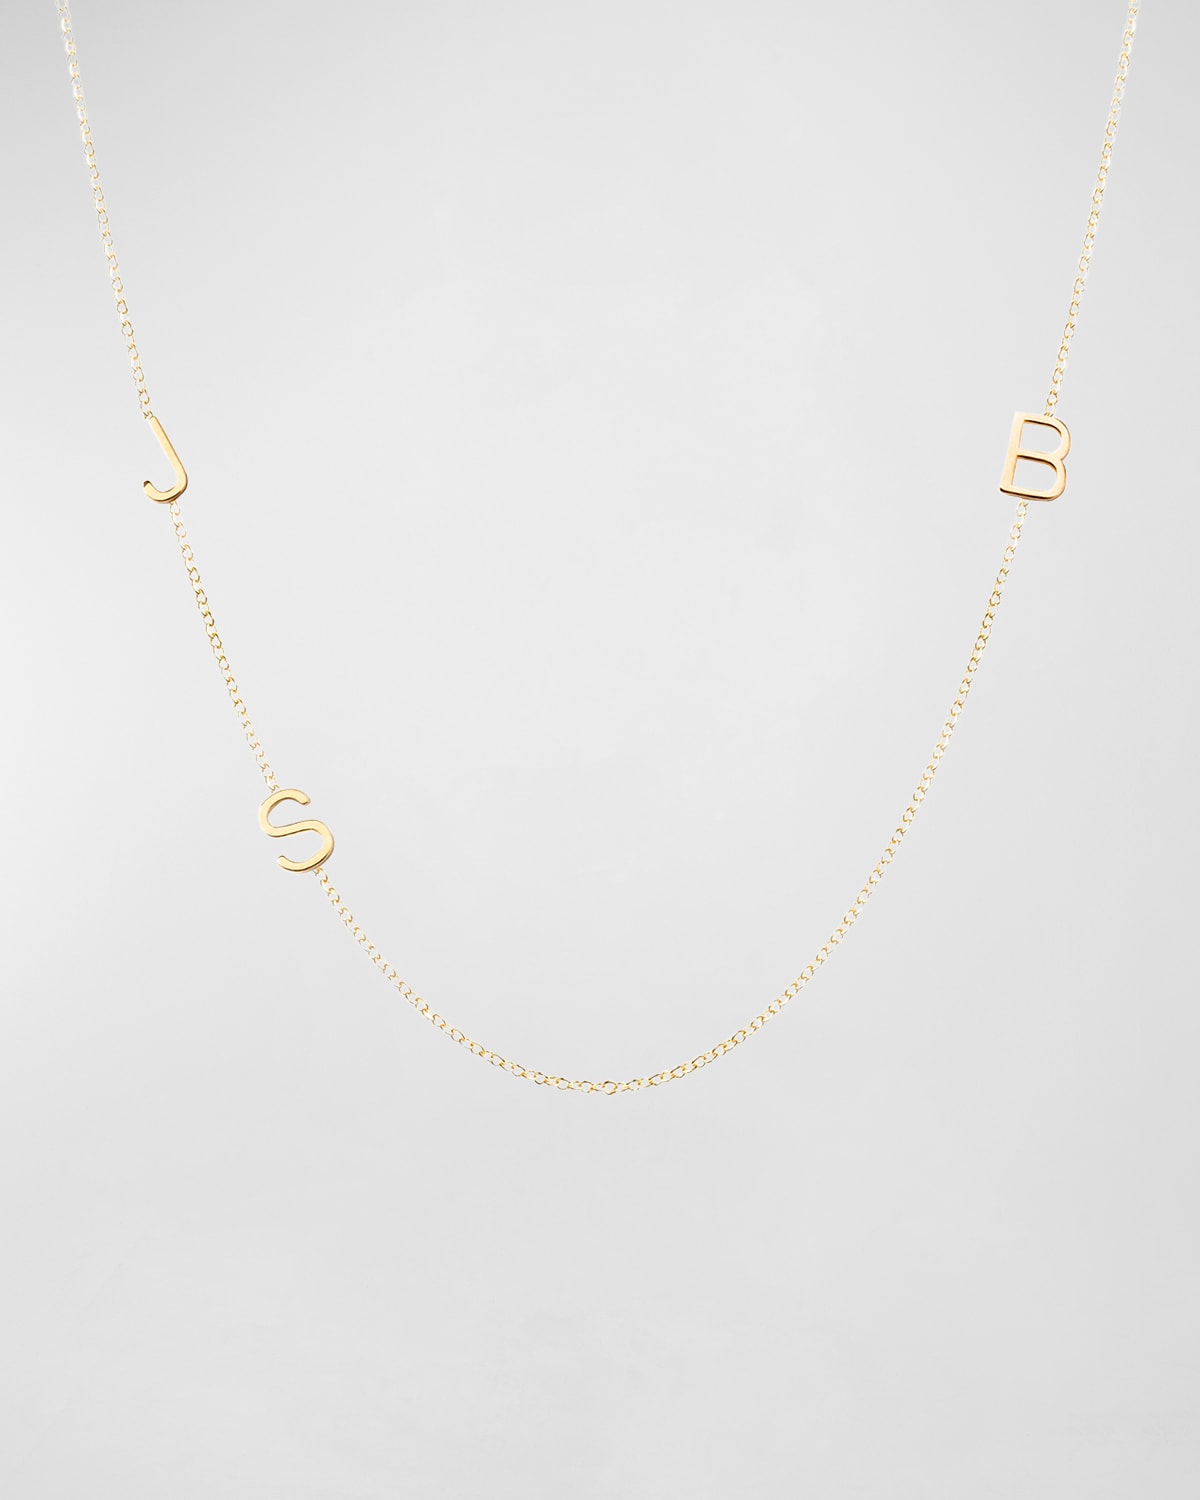 Mini 3-Letter Personalized Necklace, 14k Yellow Gold | Neiman Marcus